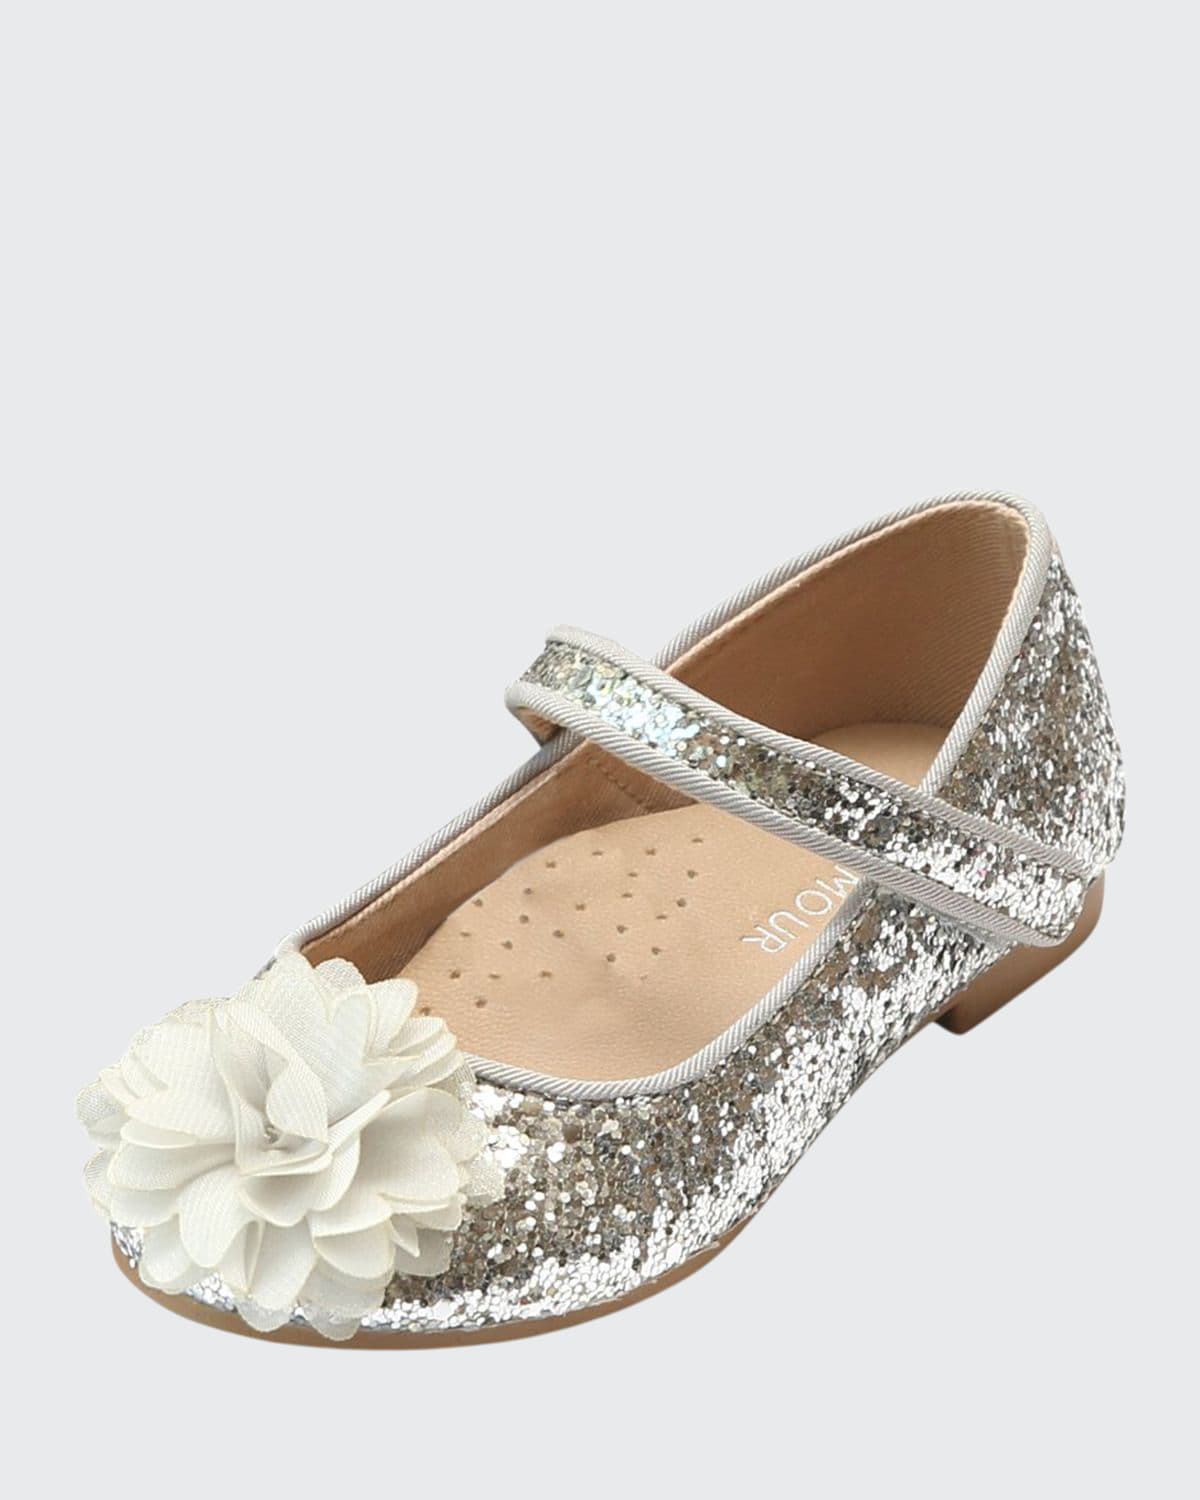 L'AMOUR SHOES GIRL'S ALICE SPARKLY GLITTER FLOWER FLATS, BABY/TODDLER/KIDS